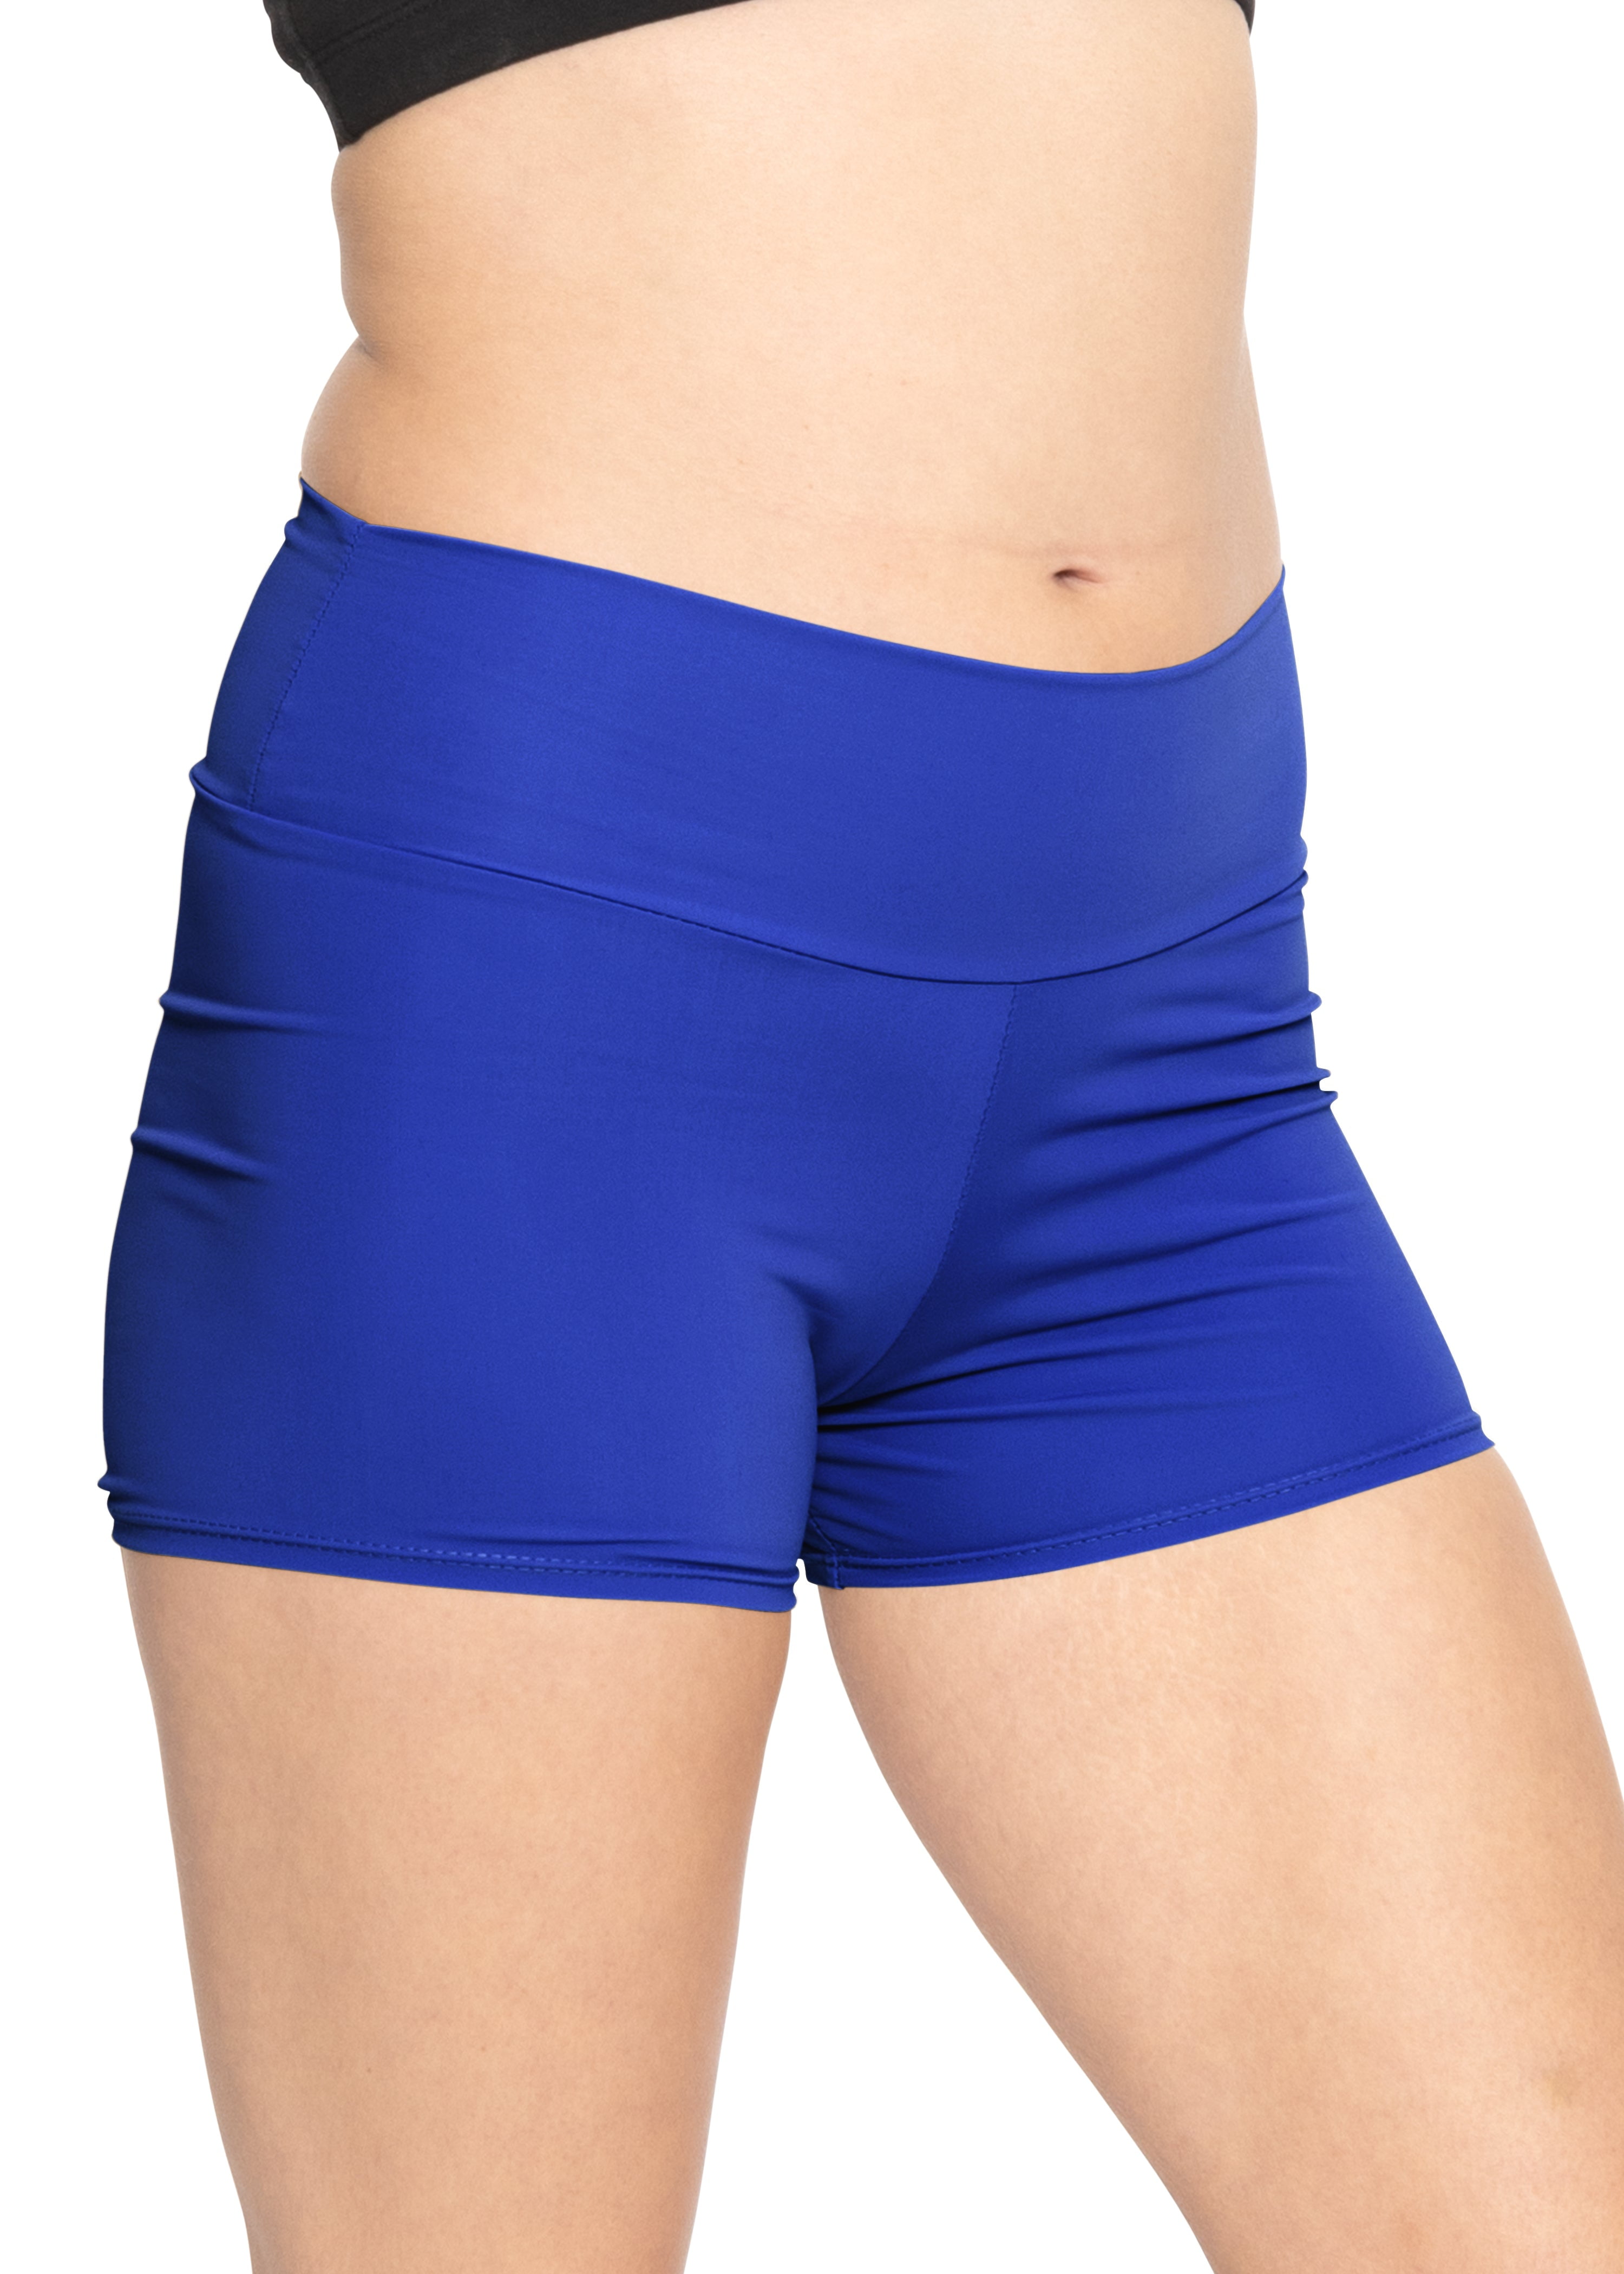 Stretch Is Comfort Women's Plus Size Stretch Performance High Waist Athletic  Booty Shorts